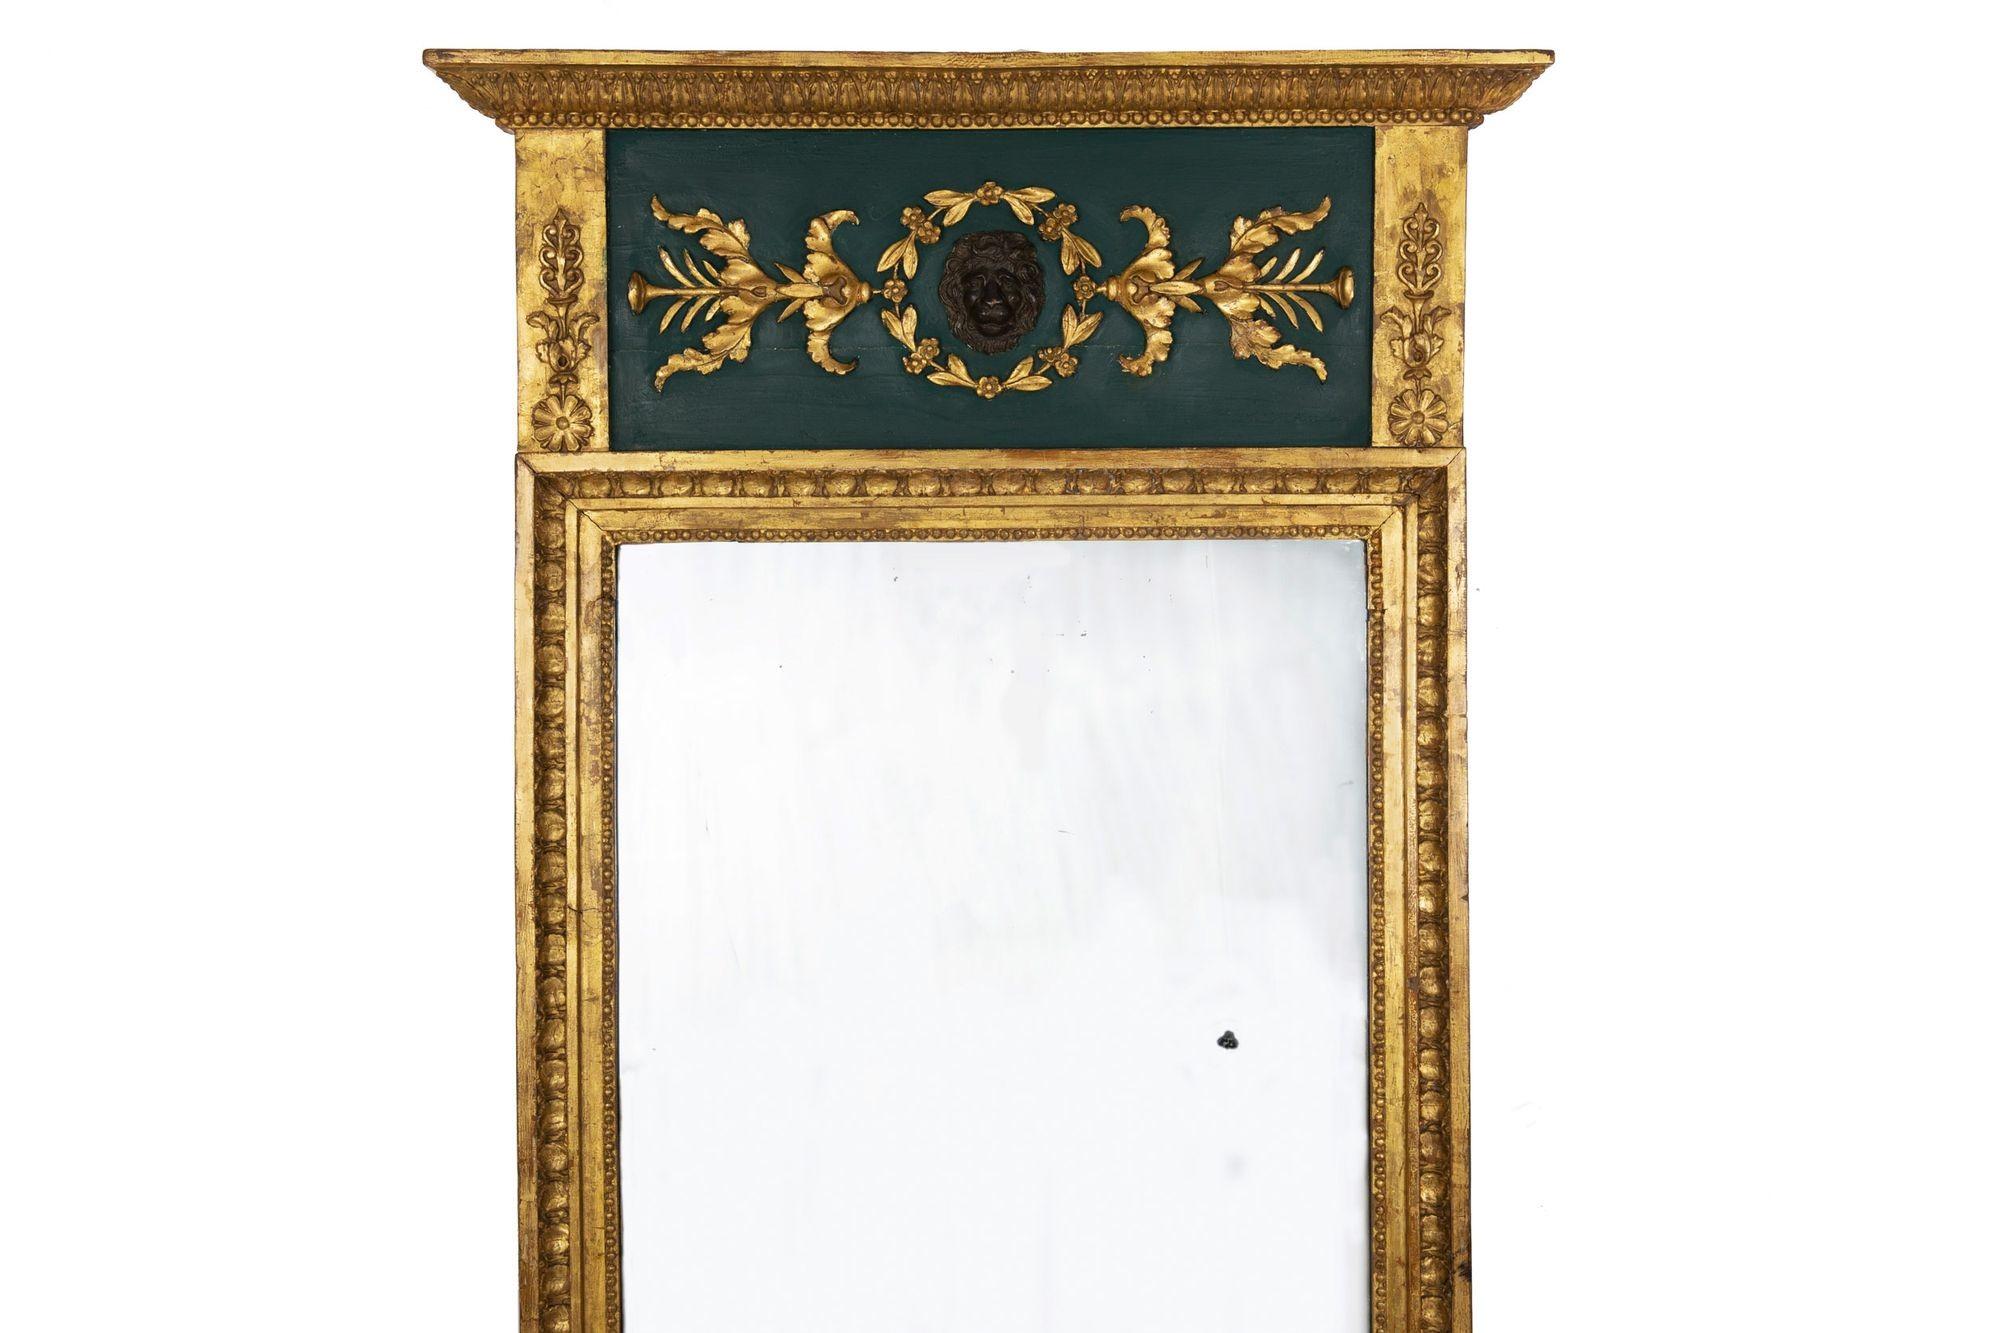 REGENCY PERIOD PARCEL GILDED AND POLYCHROMED PIER MIRROR WITH CARVED LION'S HEAD
Probably England, circa first quarter of the 19th century
Item # 307YEK13A 

A fine early 19th century pier mirror in the Neoclassical taste, it is beautifully